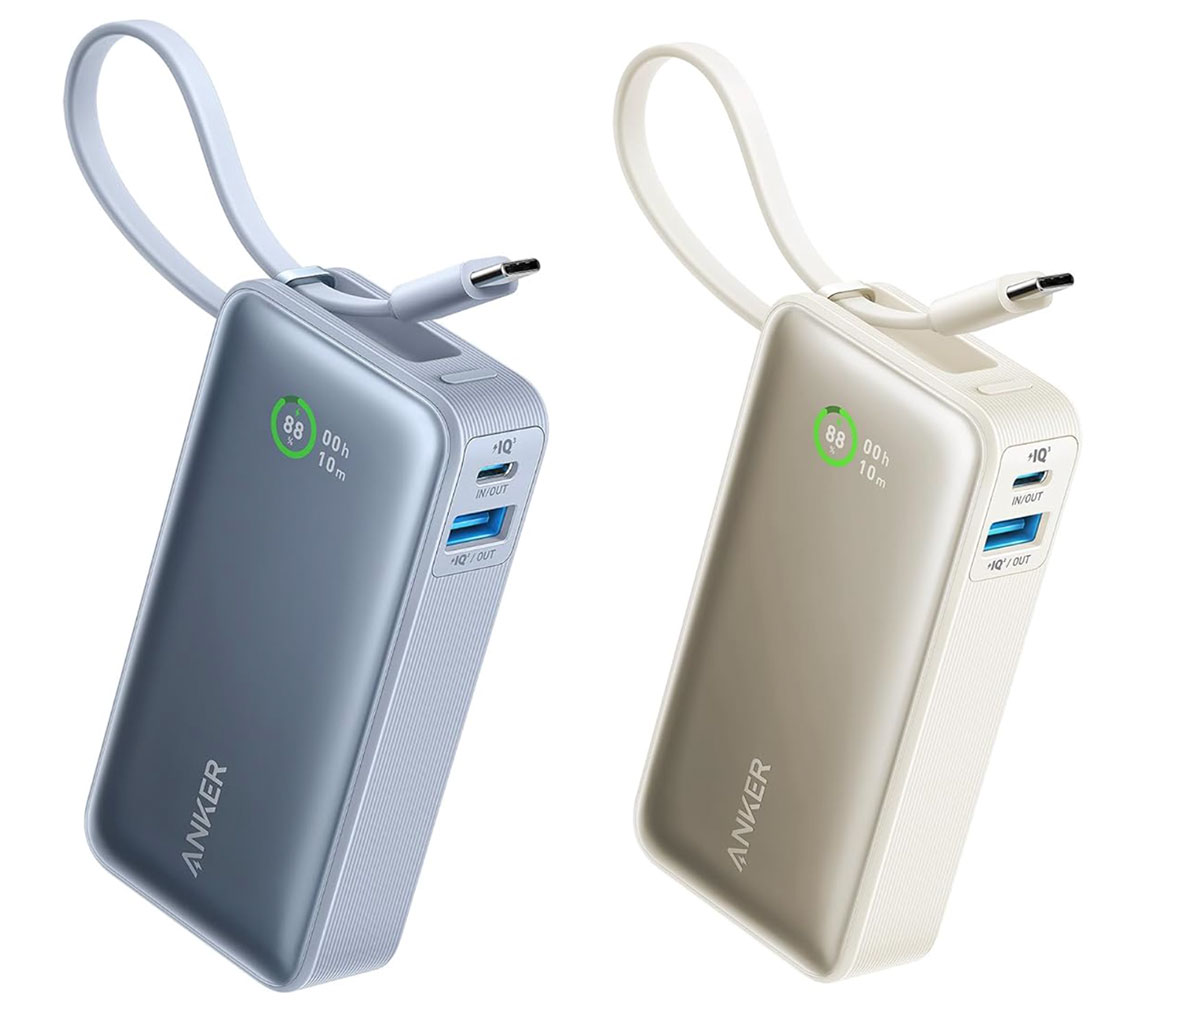 Anker Nano Power Bank – Wired and Wireless iPhone power bank